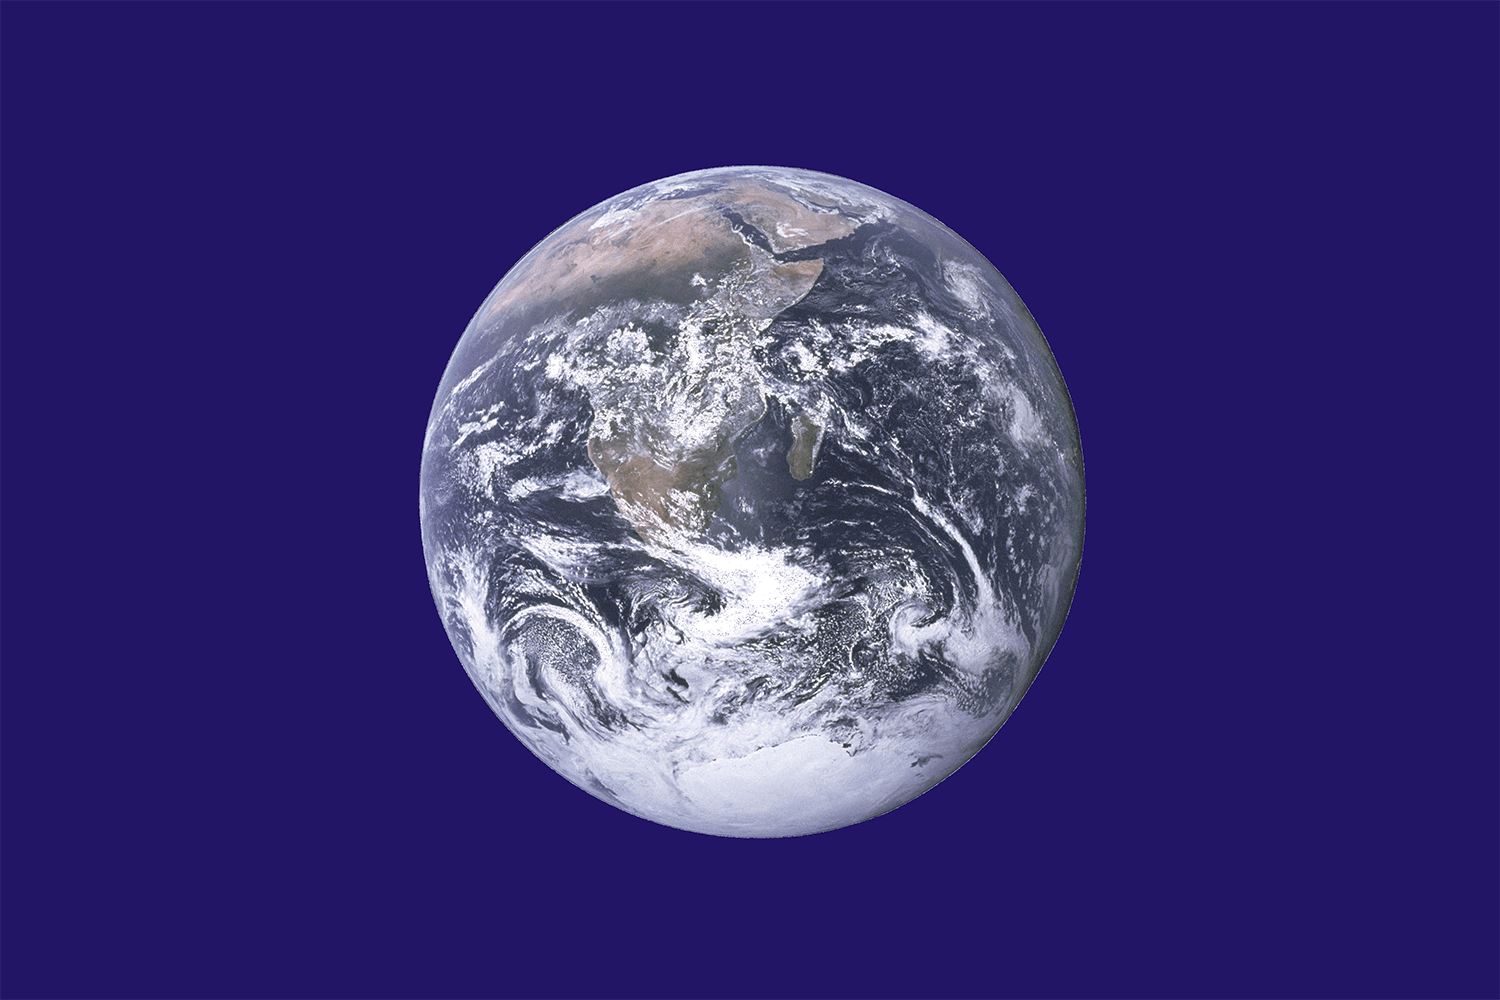 Earth Day Flag: A photo of the Earth from space, turned to show Antarctica, Africa, and the Arabian Peninsula, all on a field of deep blue. Flag design by John McConnell. Photo, dubbed “Big Blue Marble”, by the crew of NASA’s Apollo 17 mission.